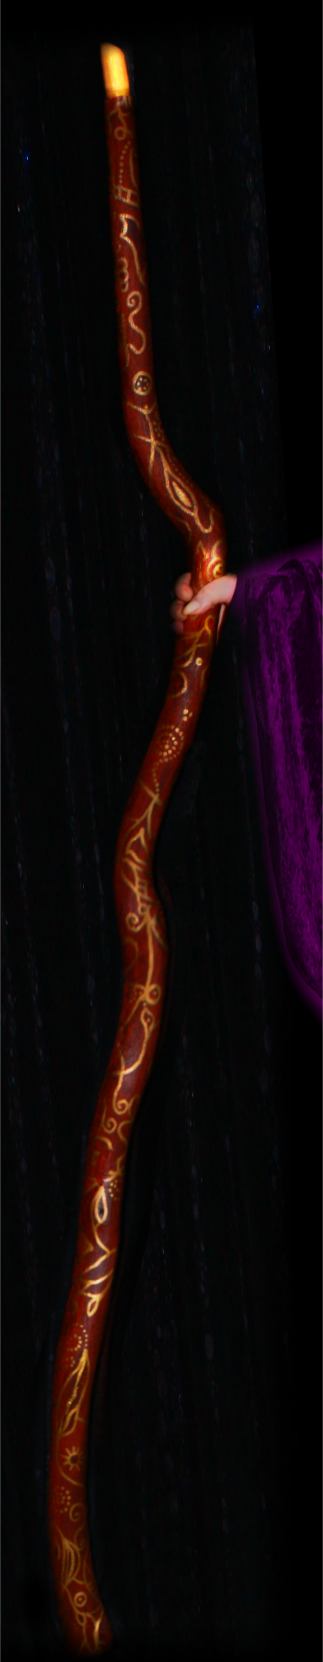 Real Magic Staff for magic spells and rituals